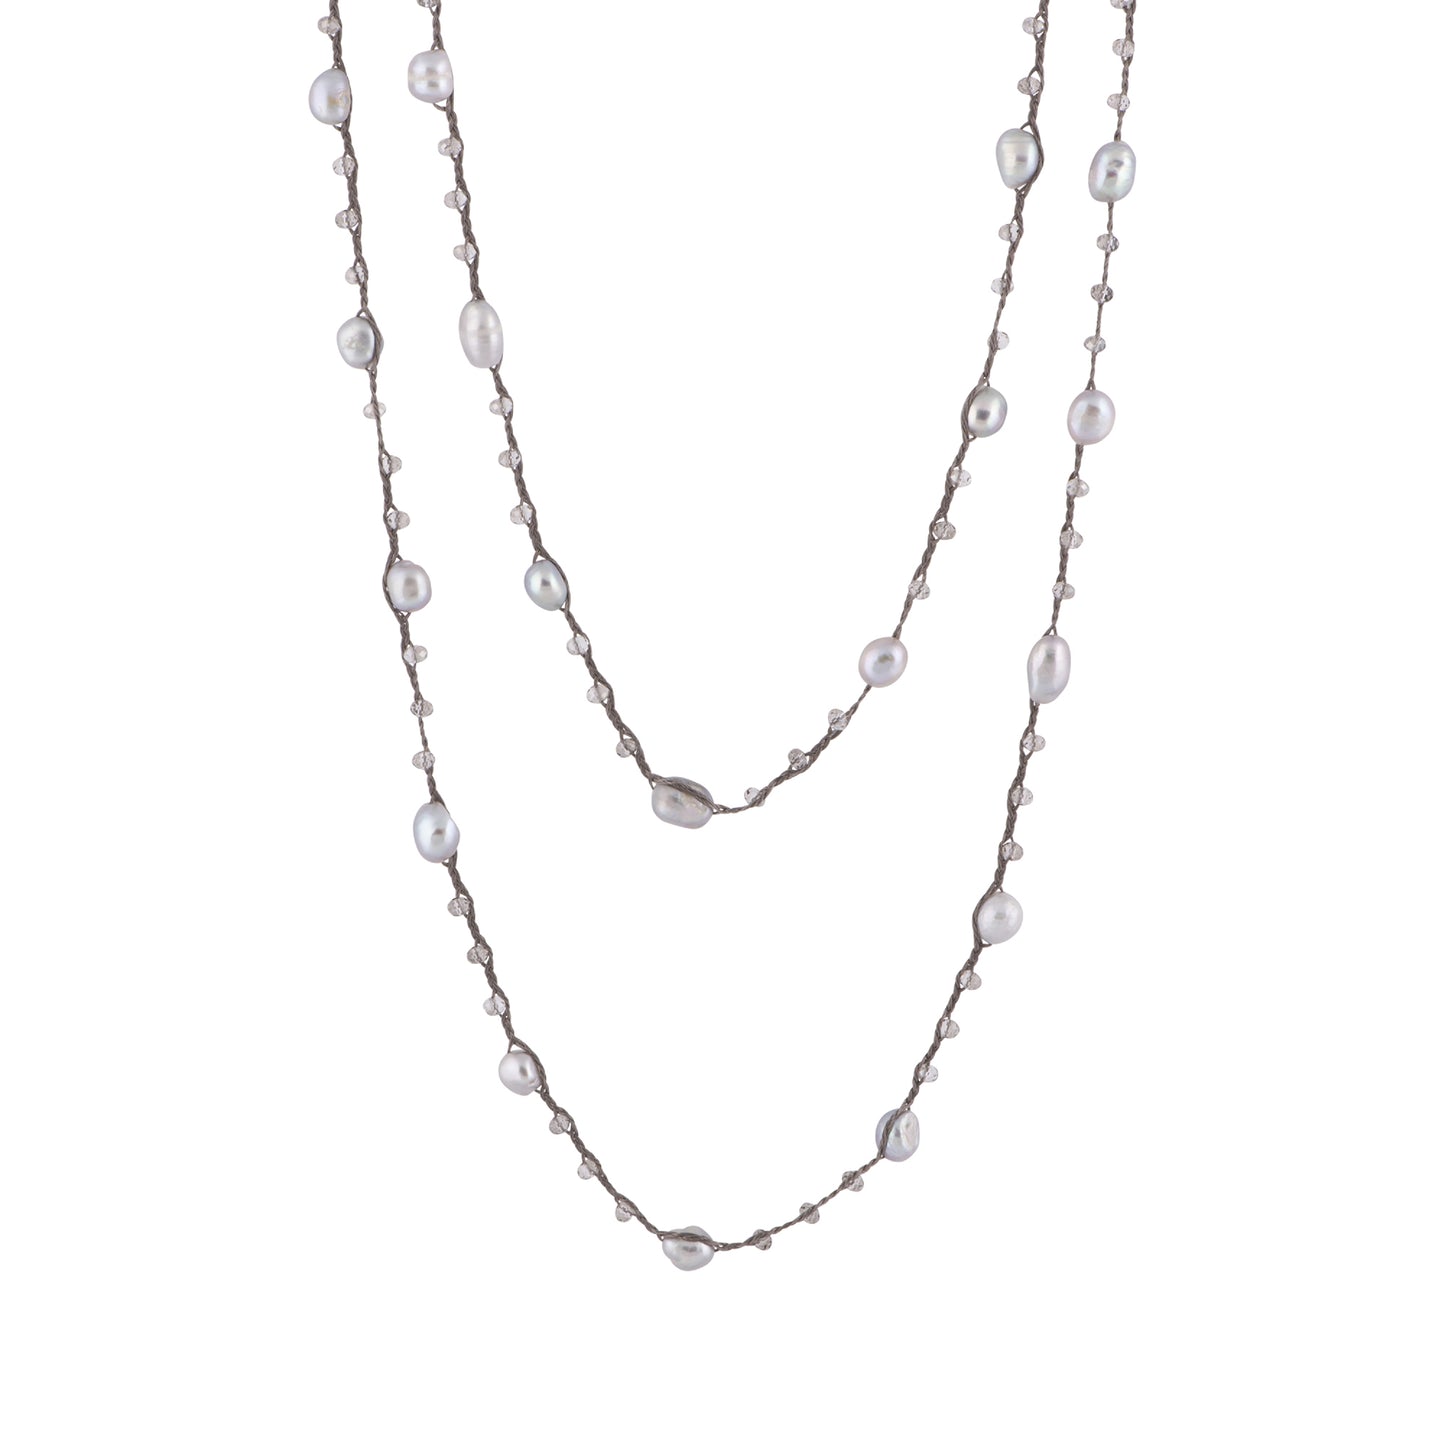 Antonia - Crochet crystal necklace with freshwater pearls (Silver pearls, layered)